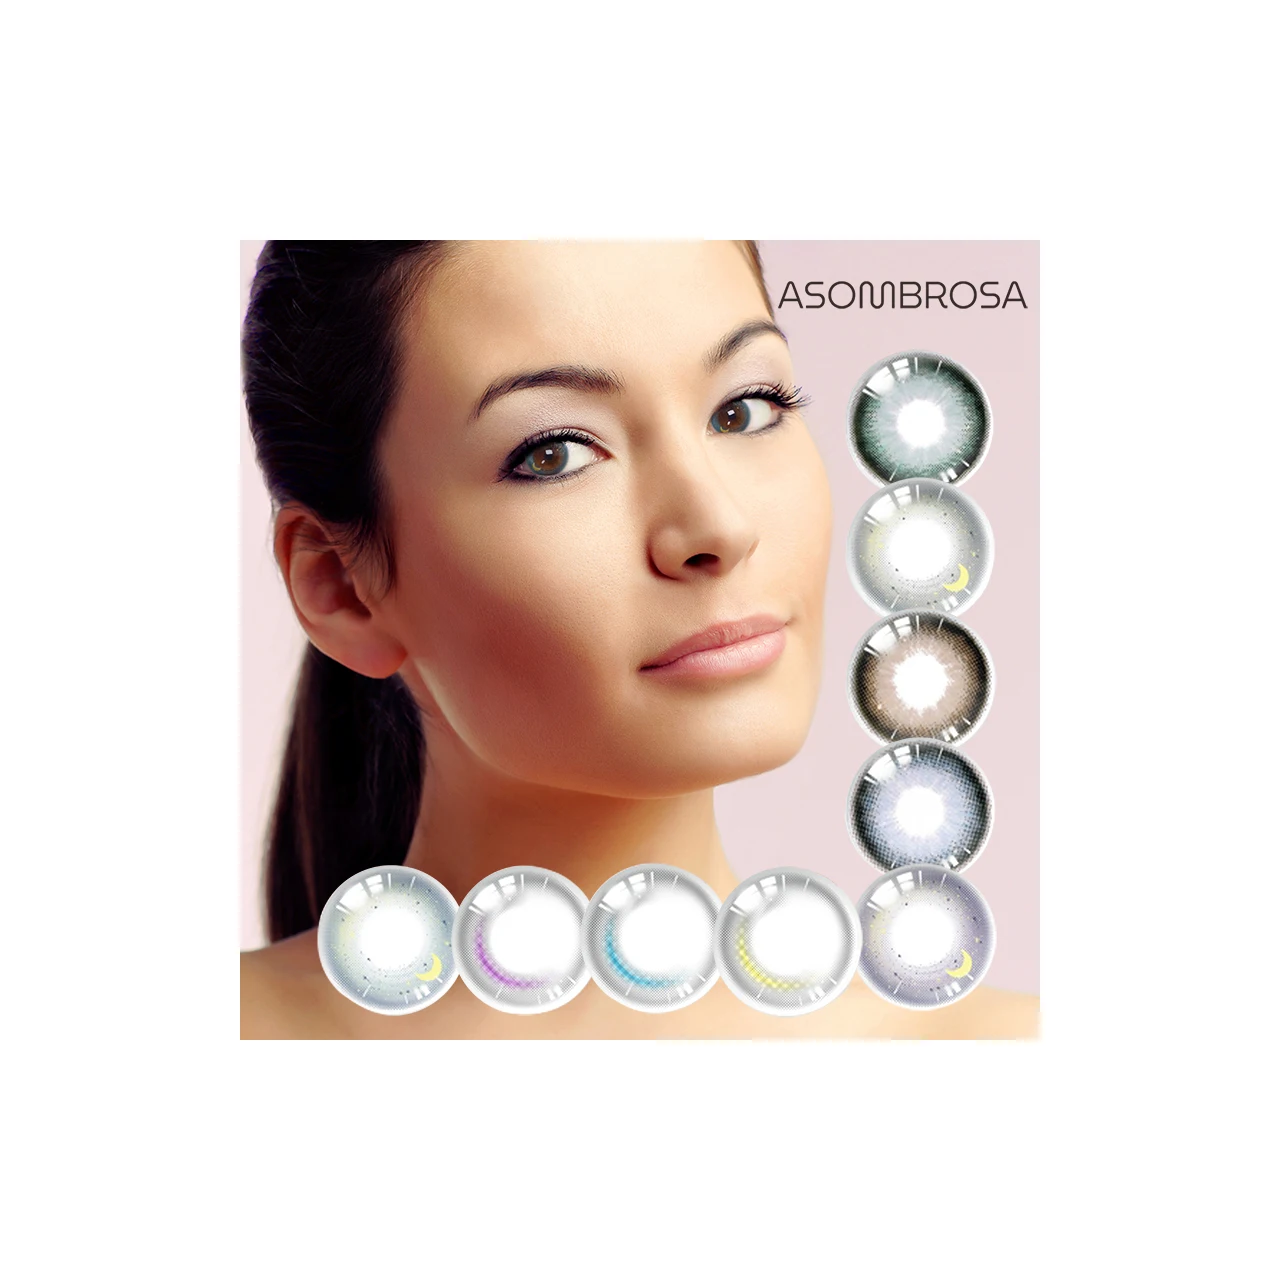 

ASOMBROSA Bebe New Moon Prescription Cosplay Lens Icy Gray Purple Brown Green Blend Yearly Soft Colored Cosmetic Contact Lenses, 9 colors